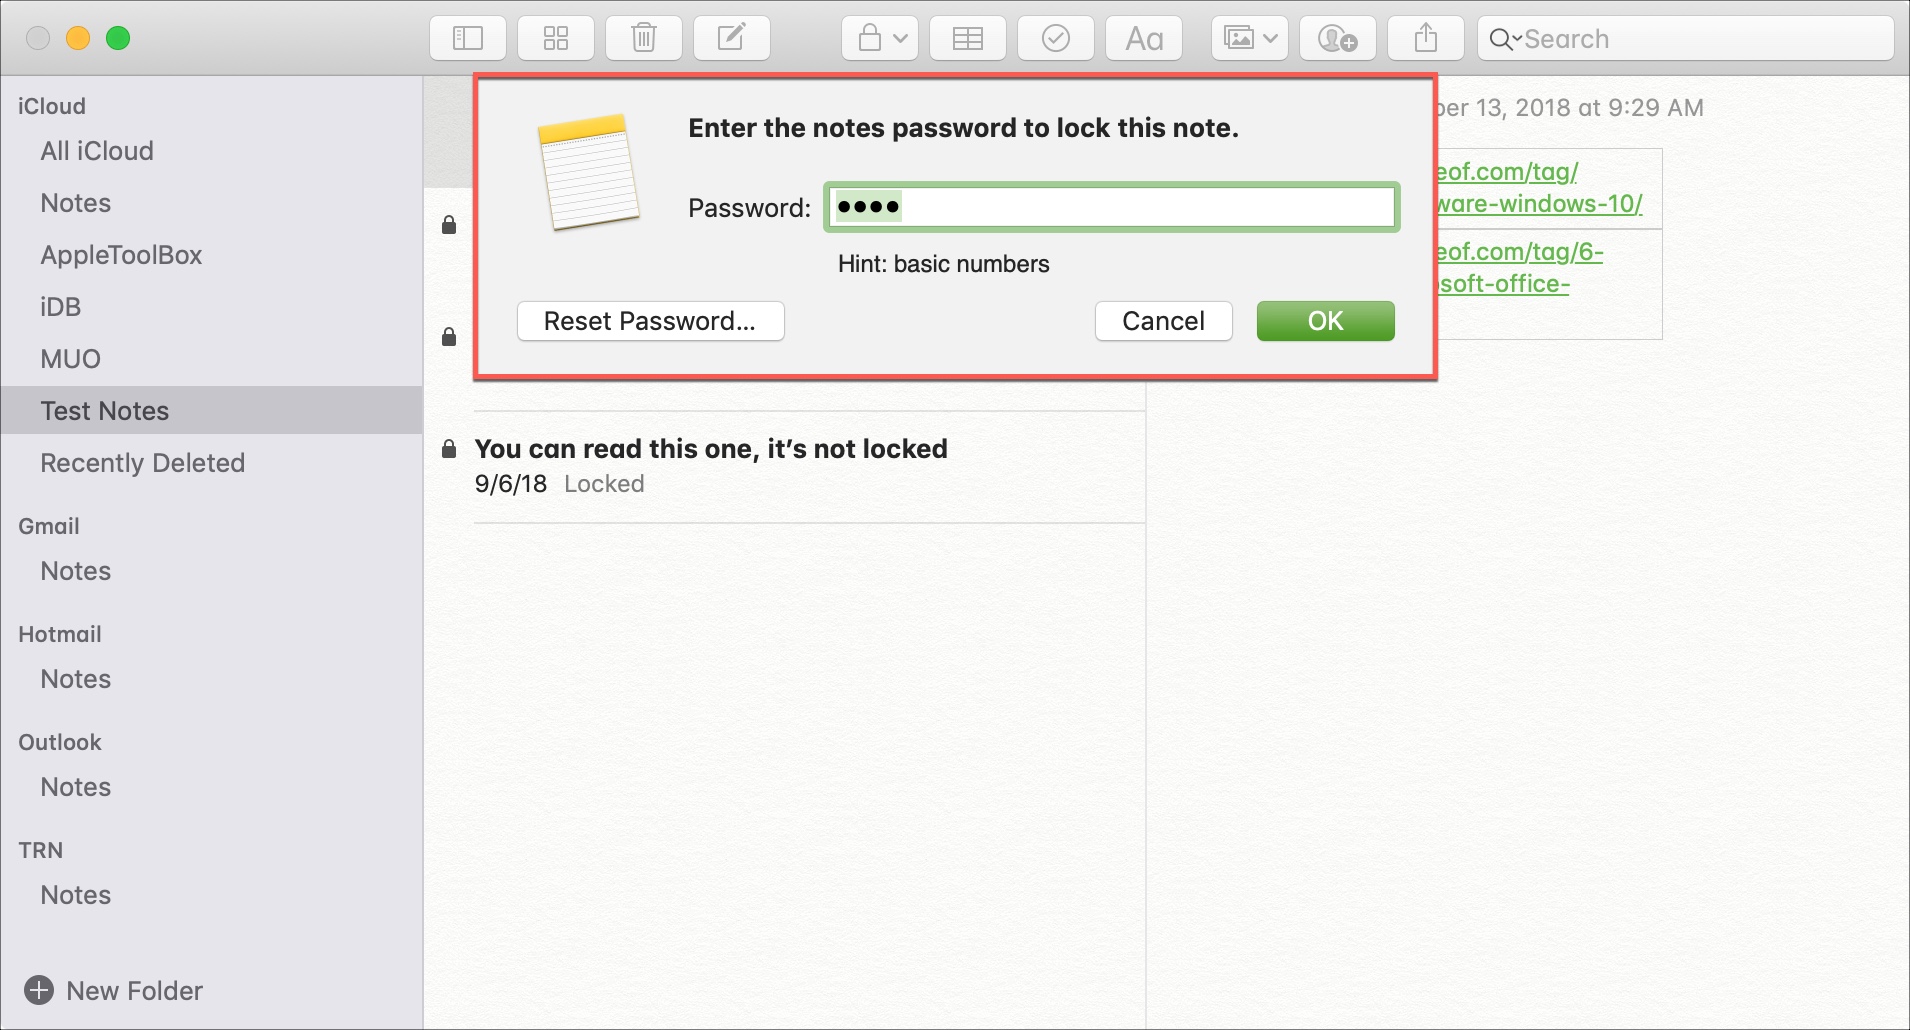 How to reset your Notes password on iPhone, iPad and Mac